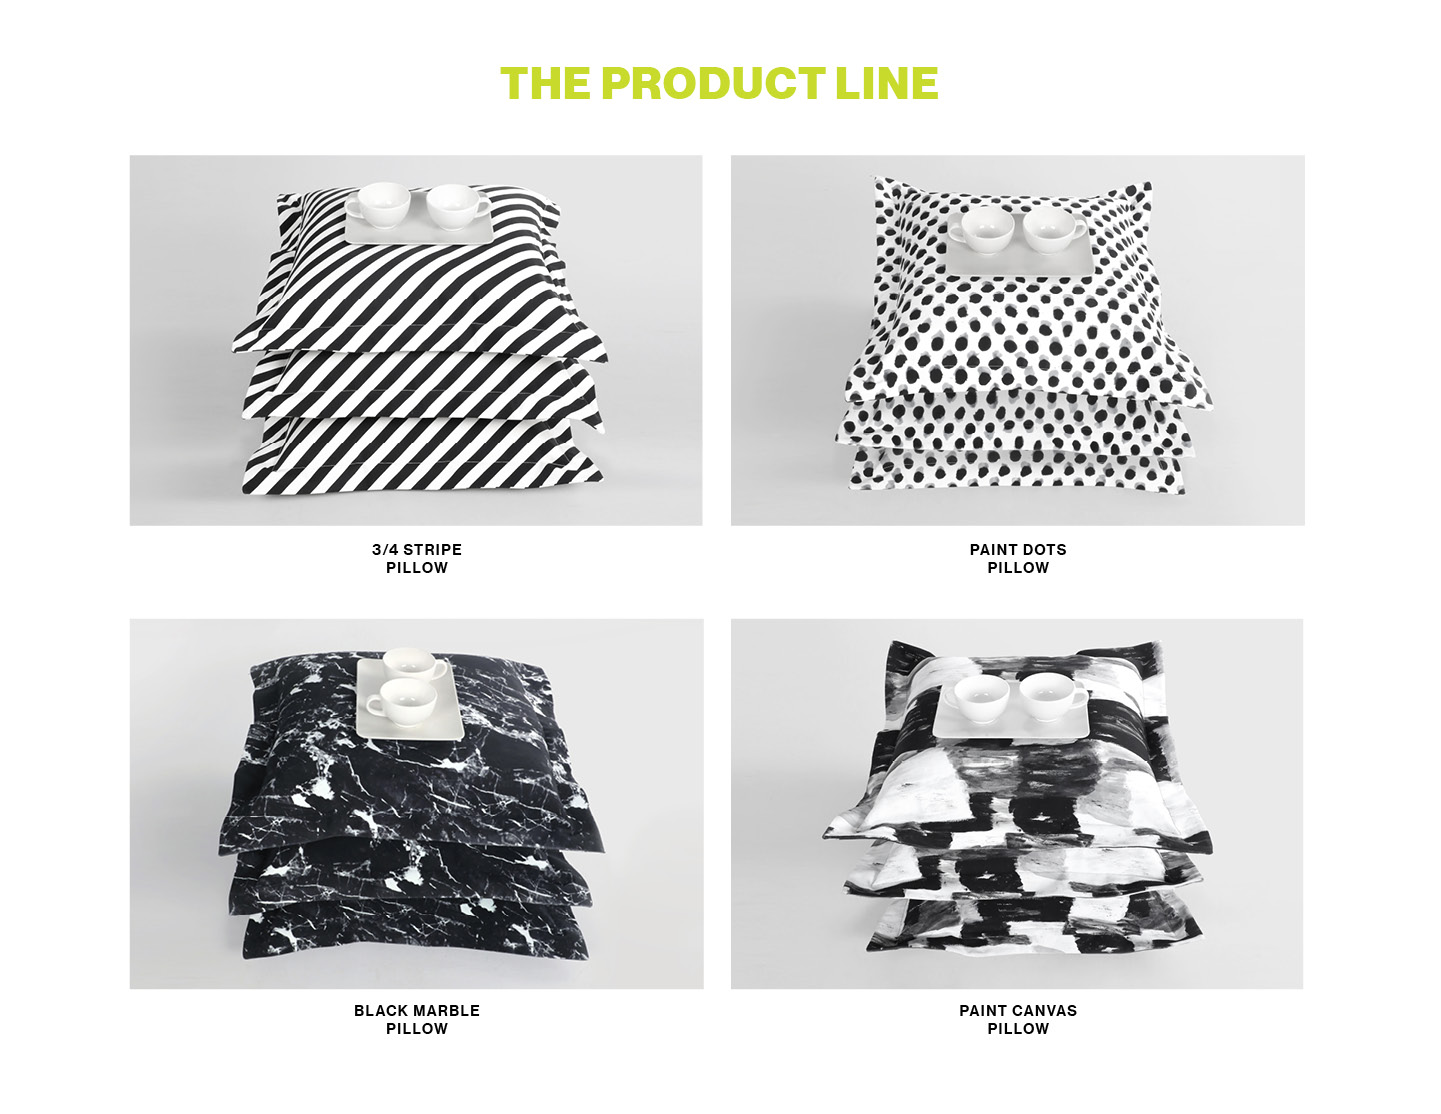 The Pillow product line